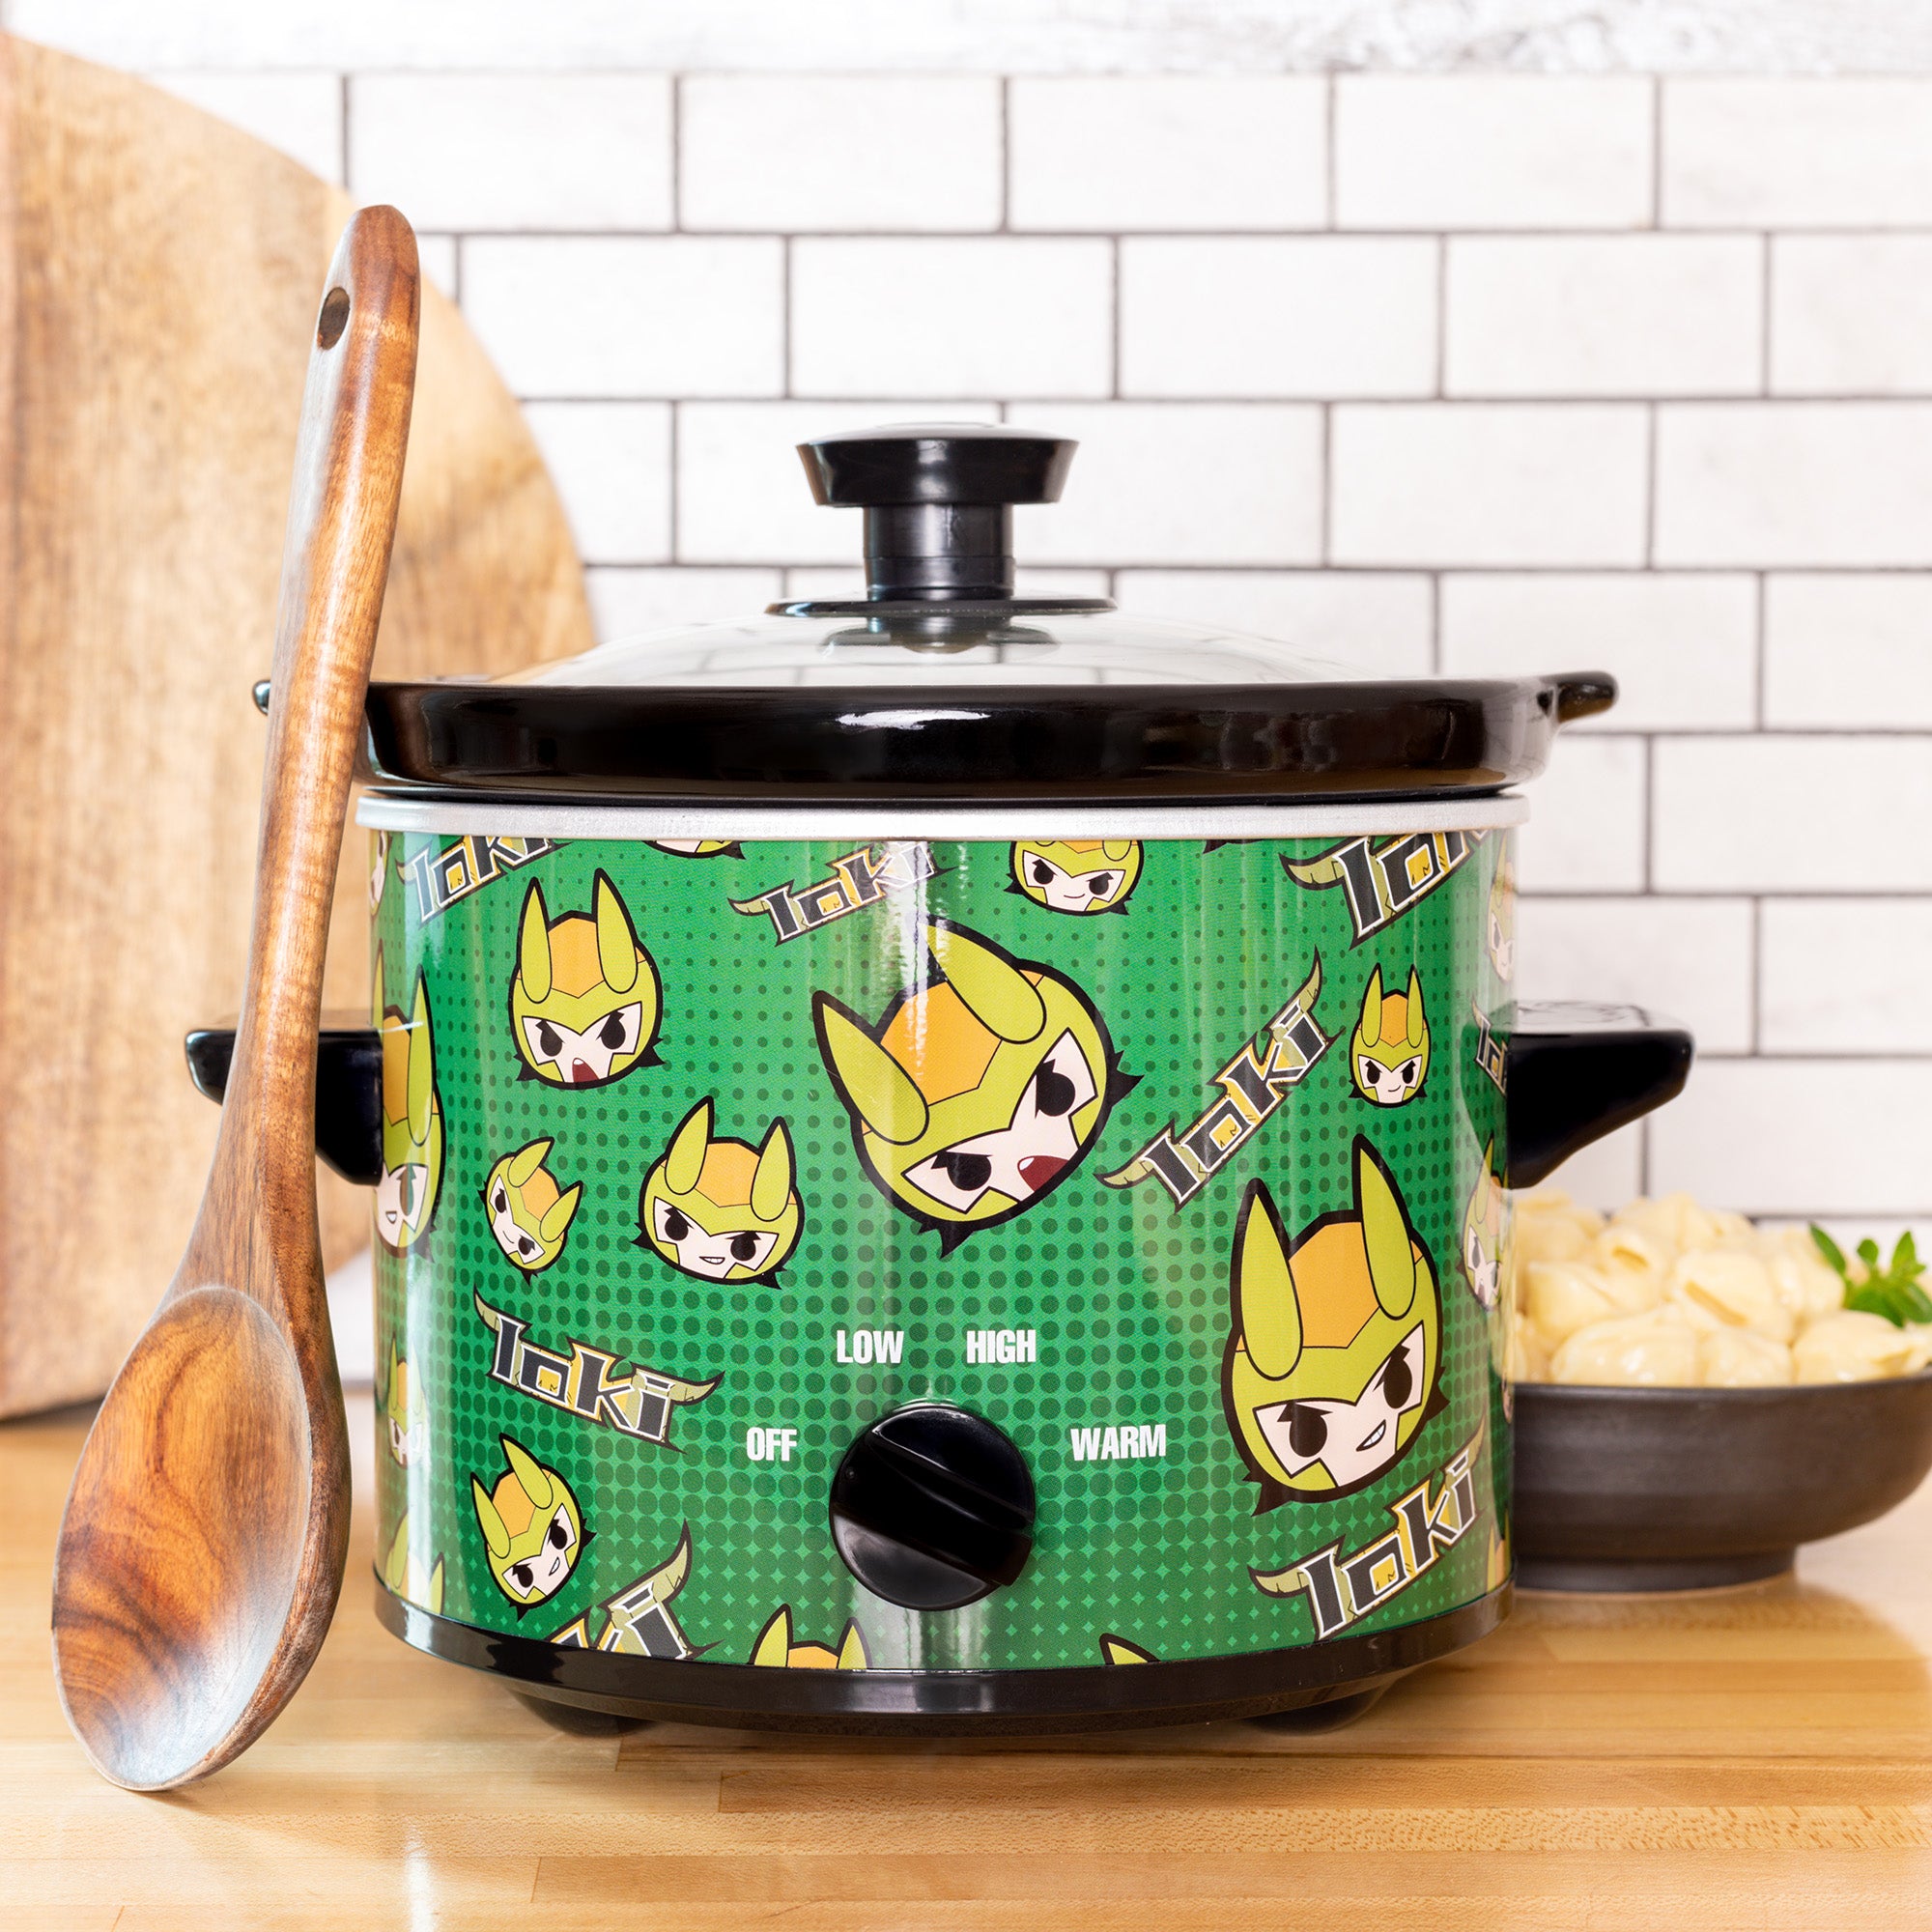 Novelty & Pop Culture-Inspired Slow Cookers